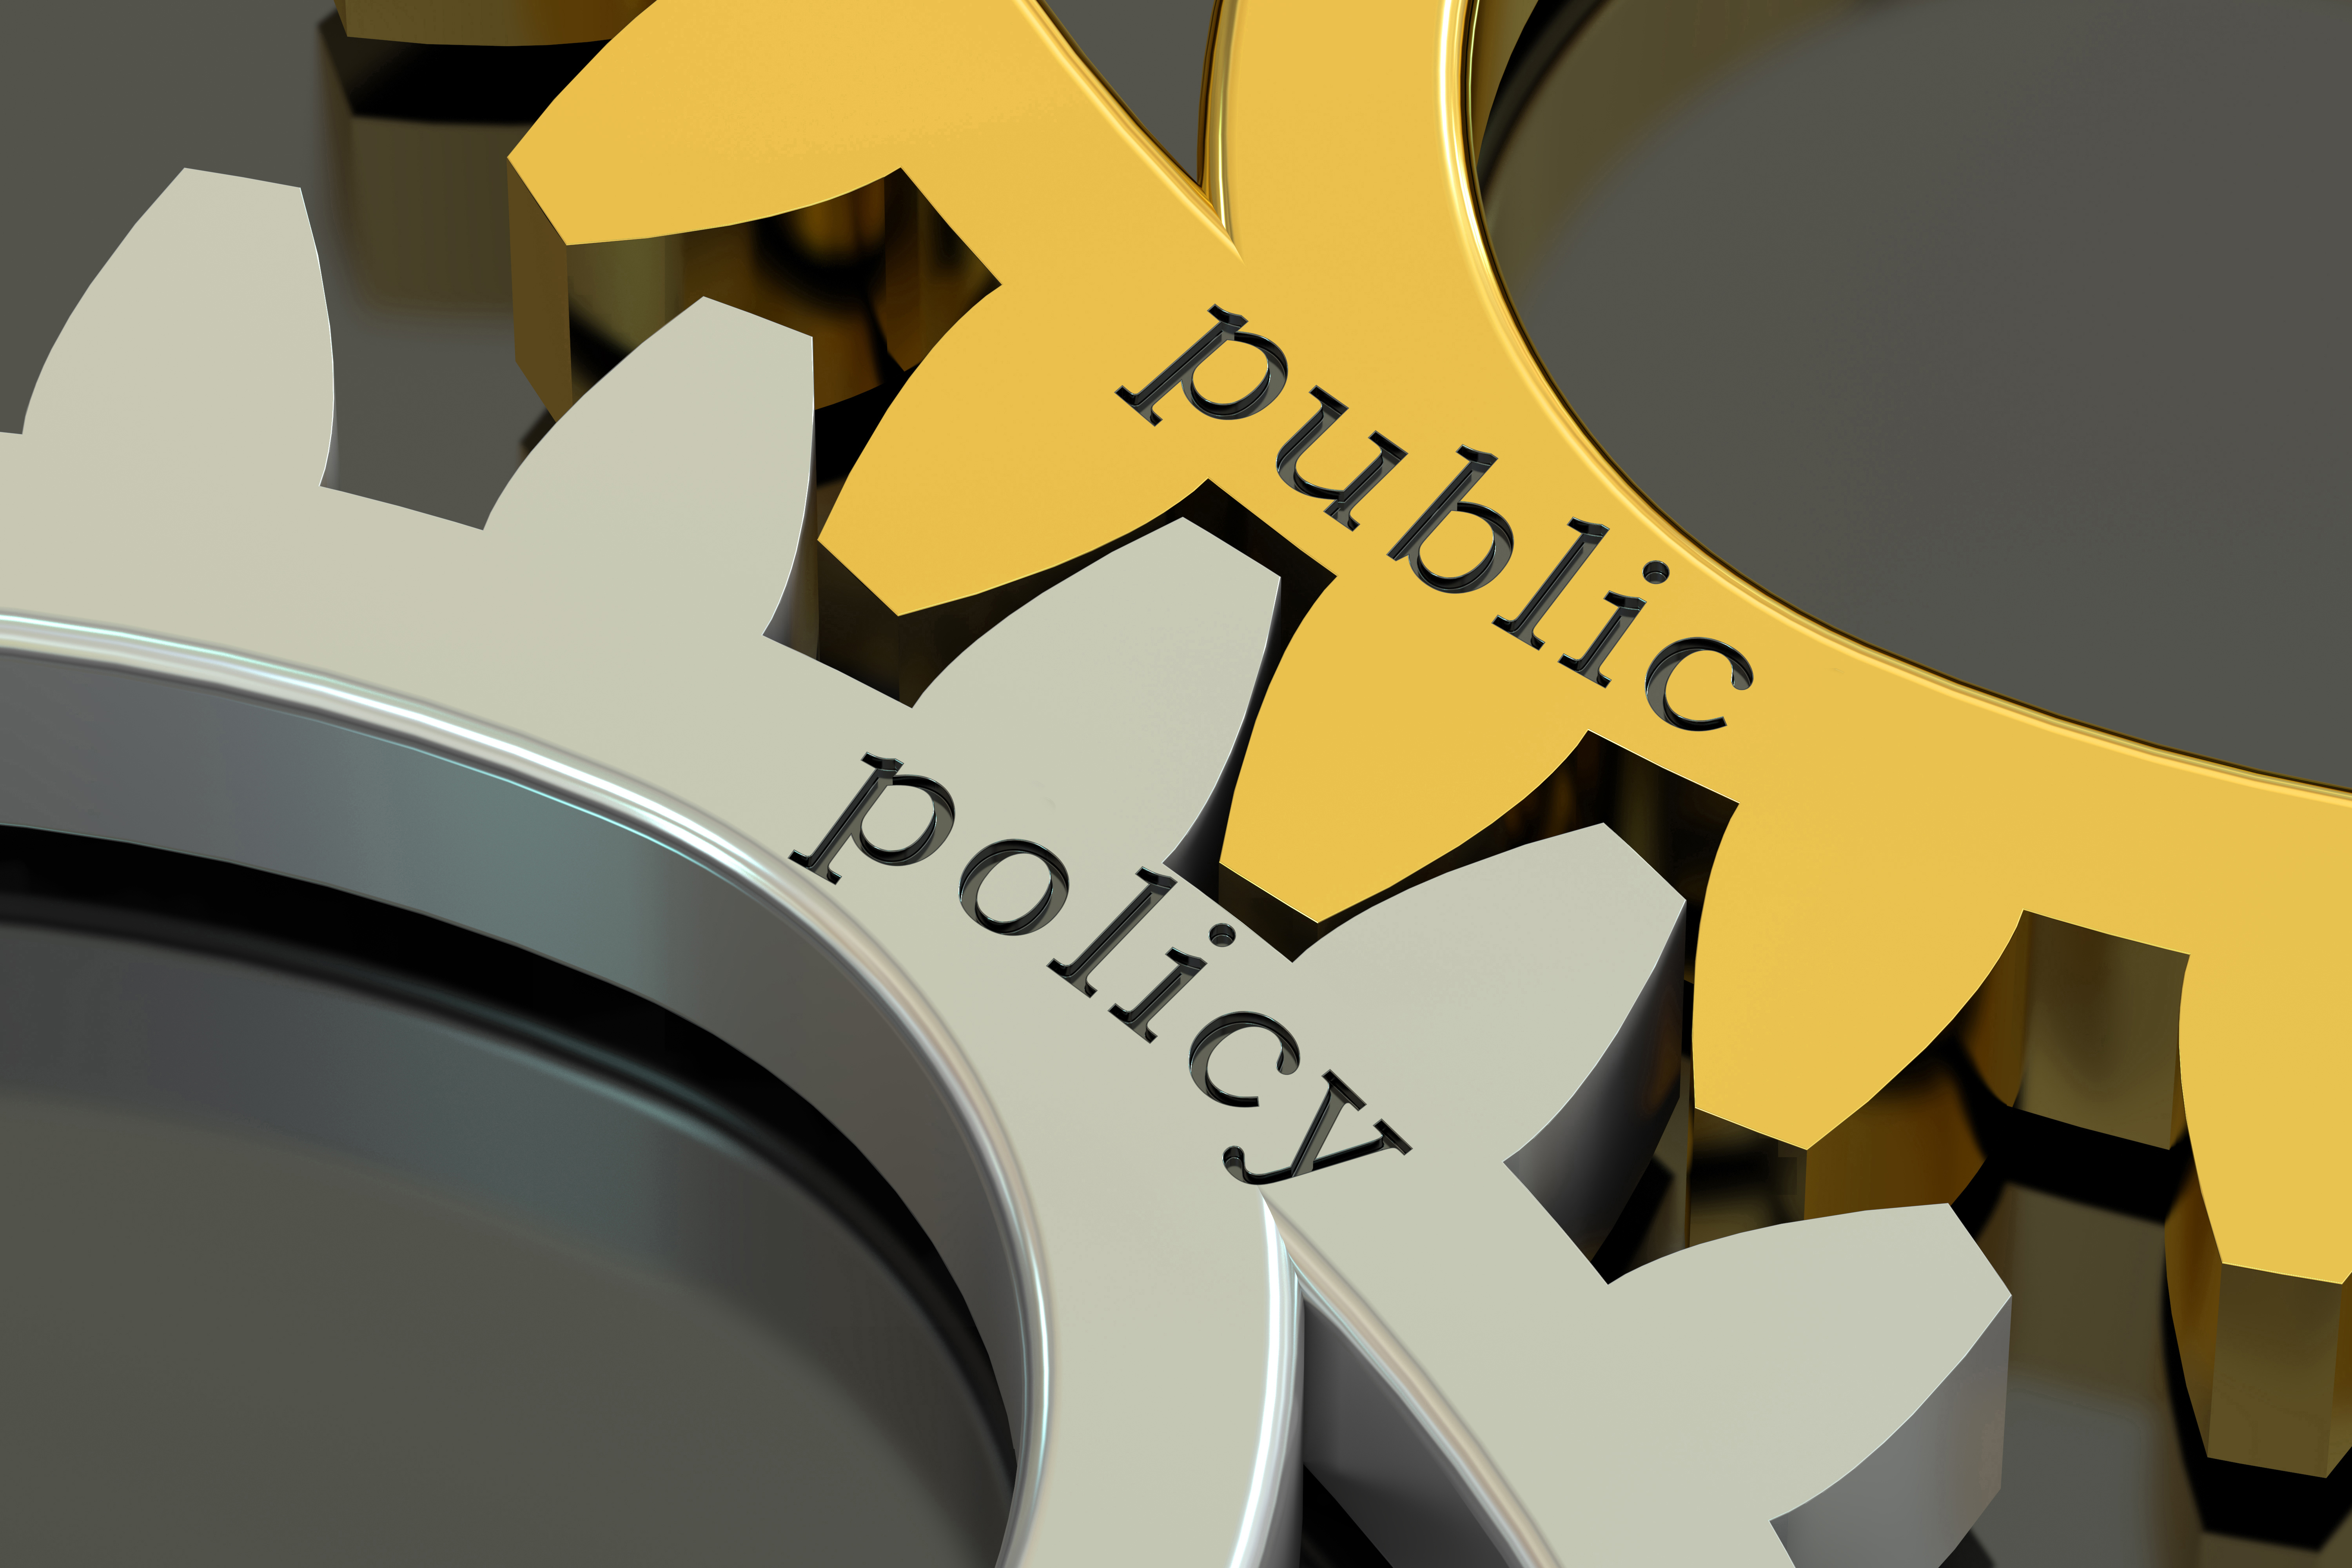 What is Public Policy? Definition, Scope, Features, Types & More